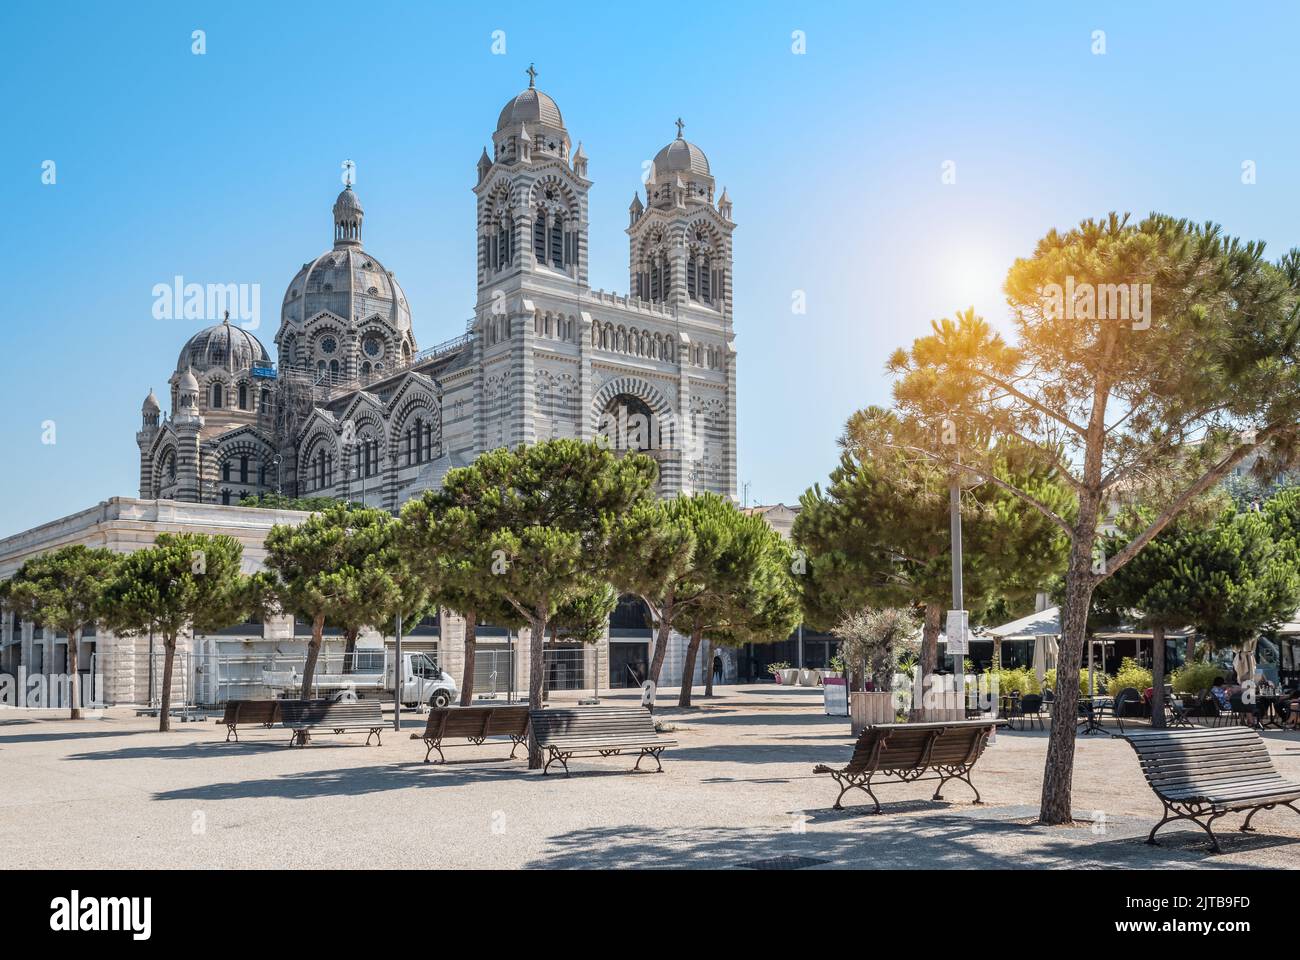 Cathedral of Saint Mary Major, Roman Catholic Church in Marseille, France. Stock Photo